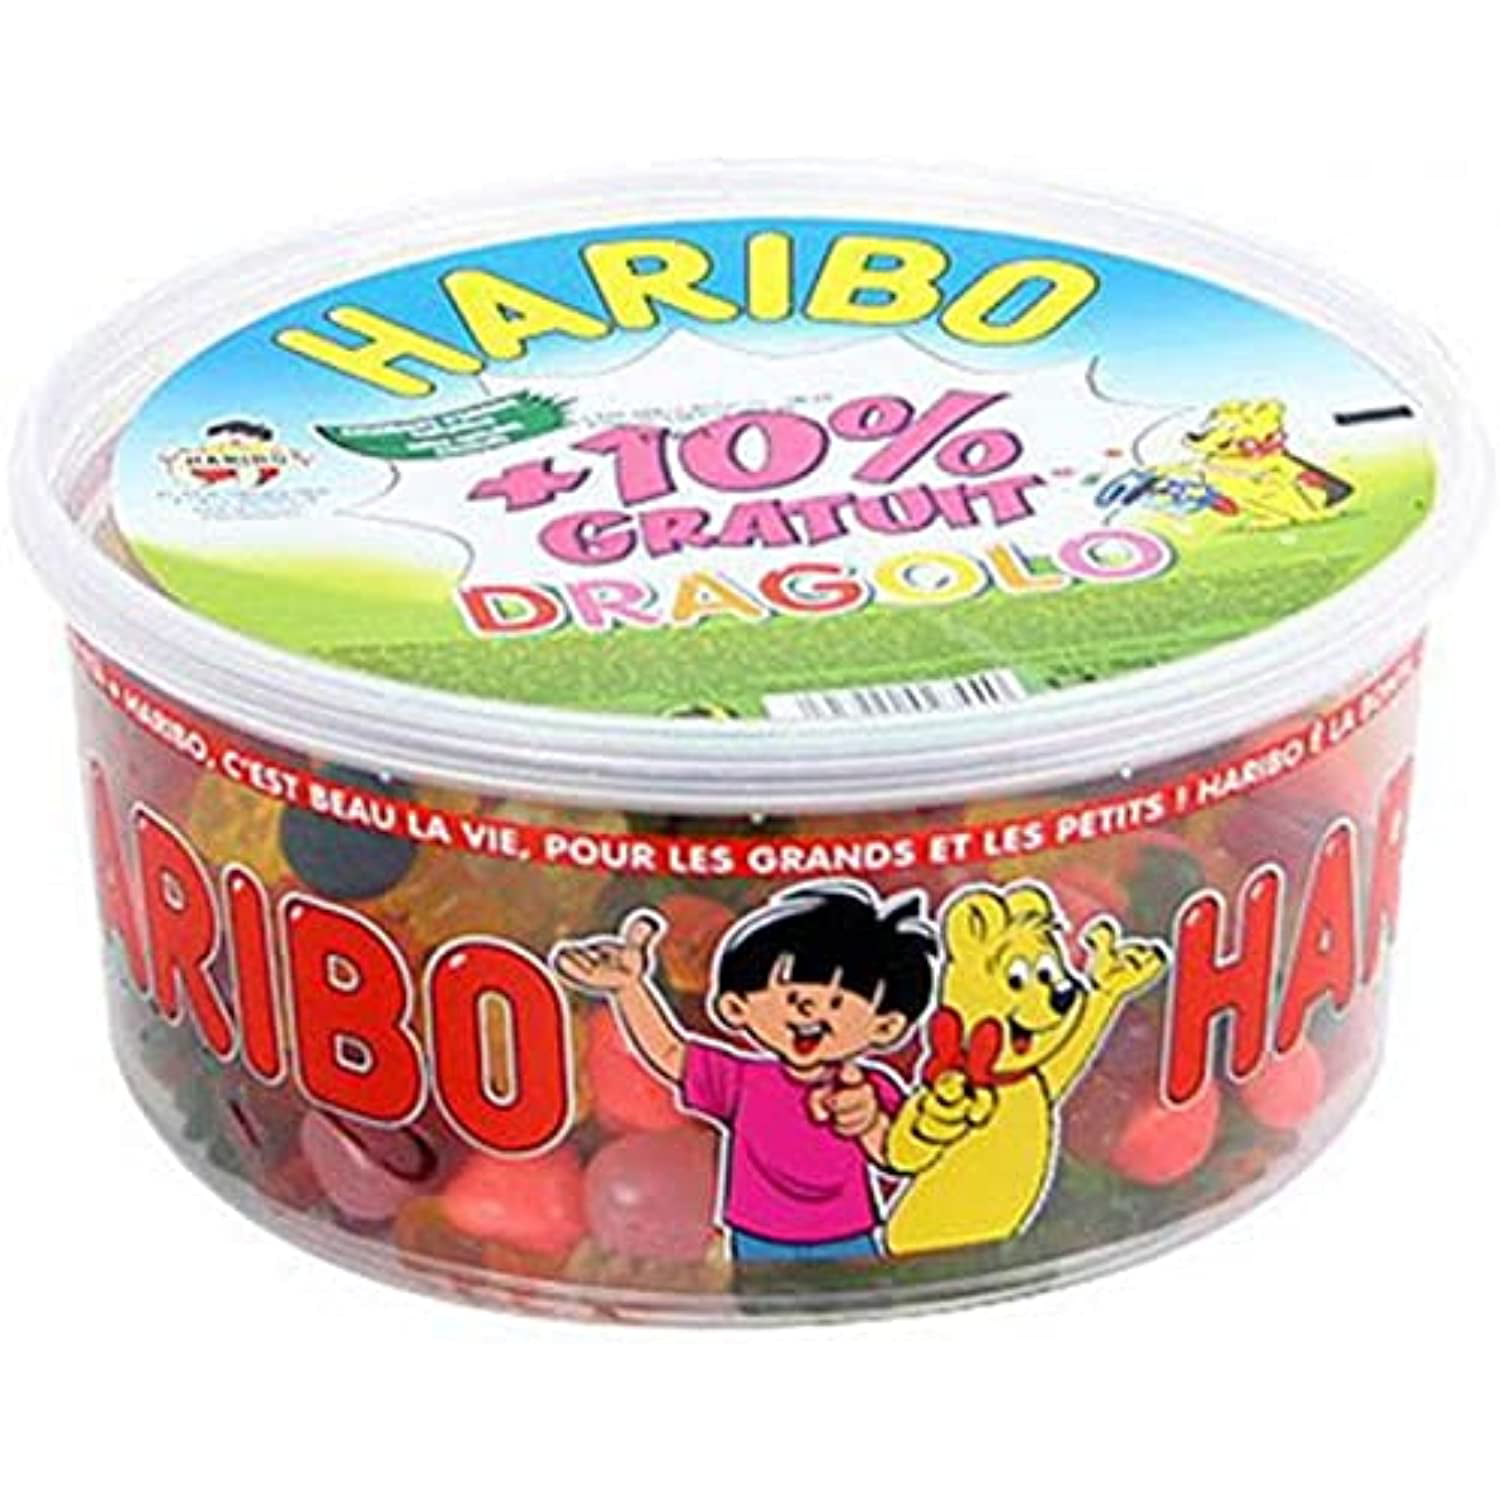 Haribo Dragolo - Resealable Plastic Tub From France 